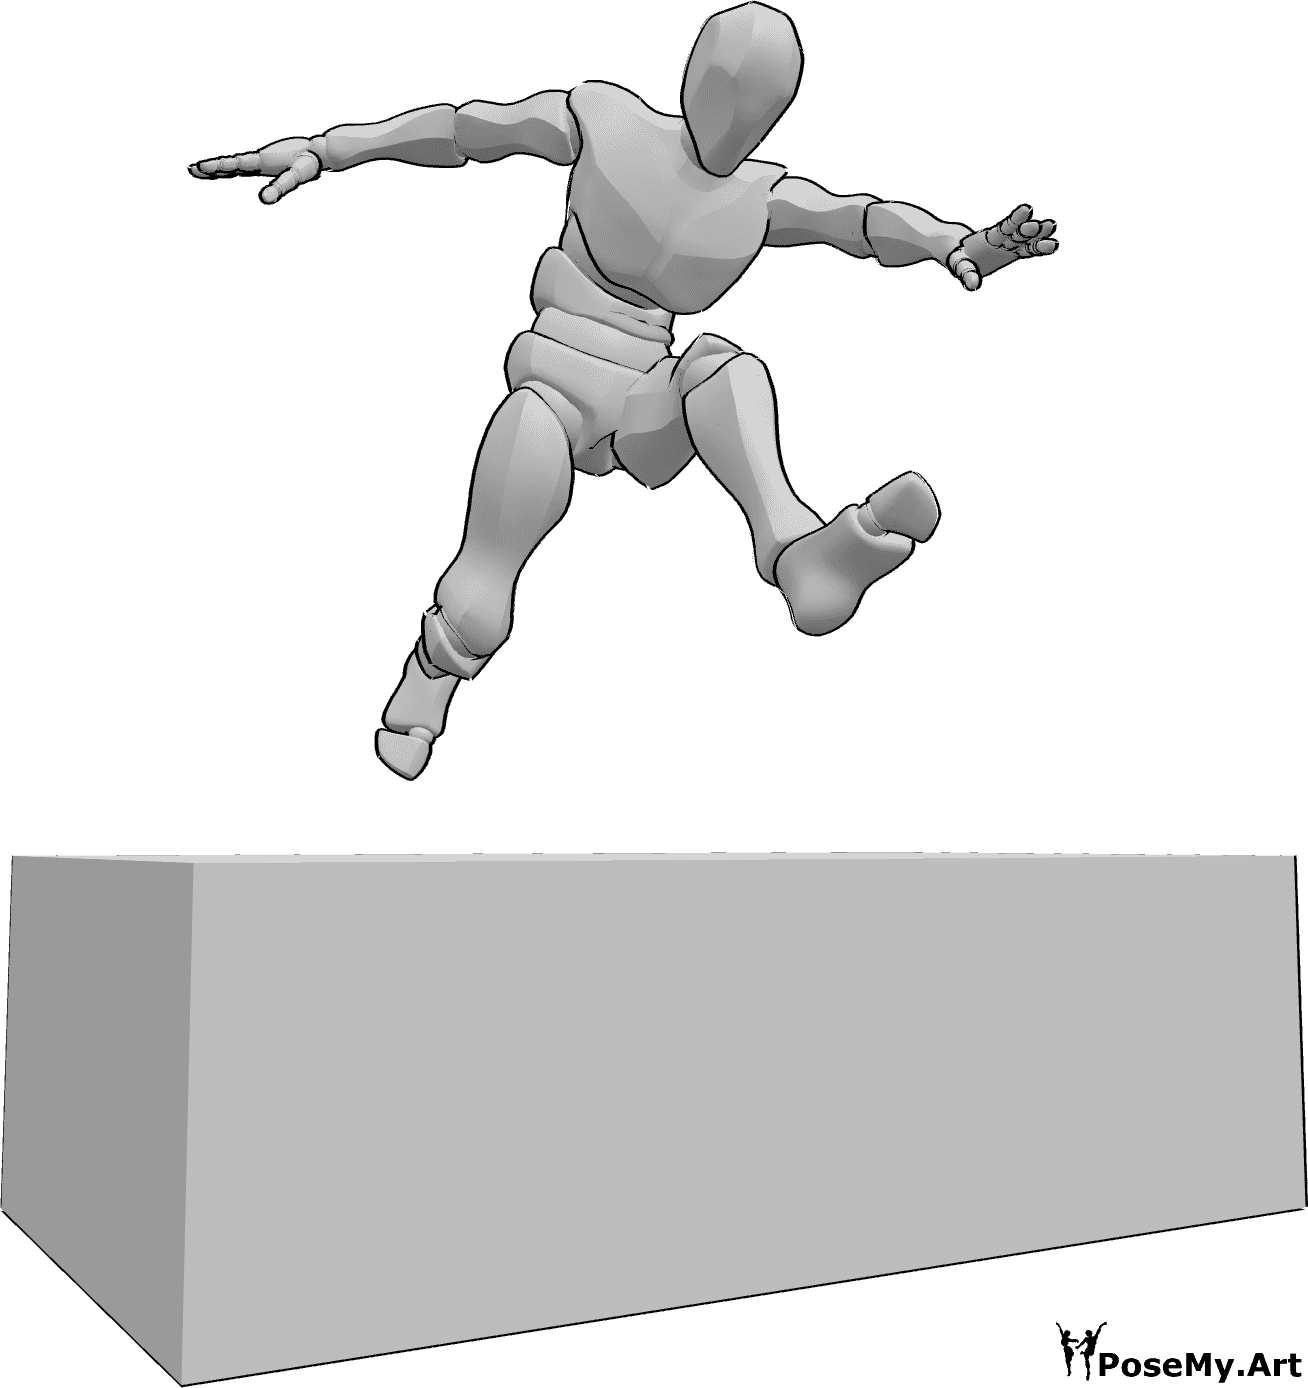 Pose Reference- Jumping over obstacle pose - Male is jumping high from running, jumping over an obstacle